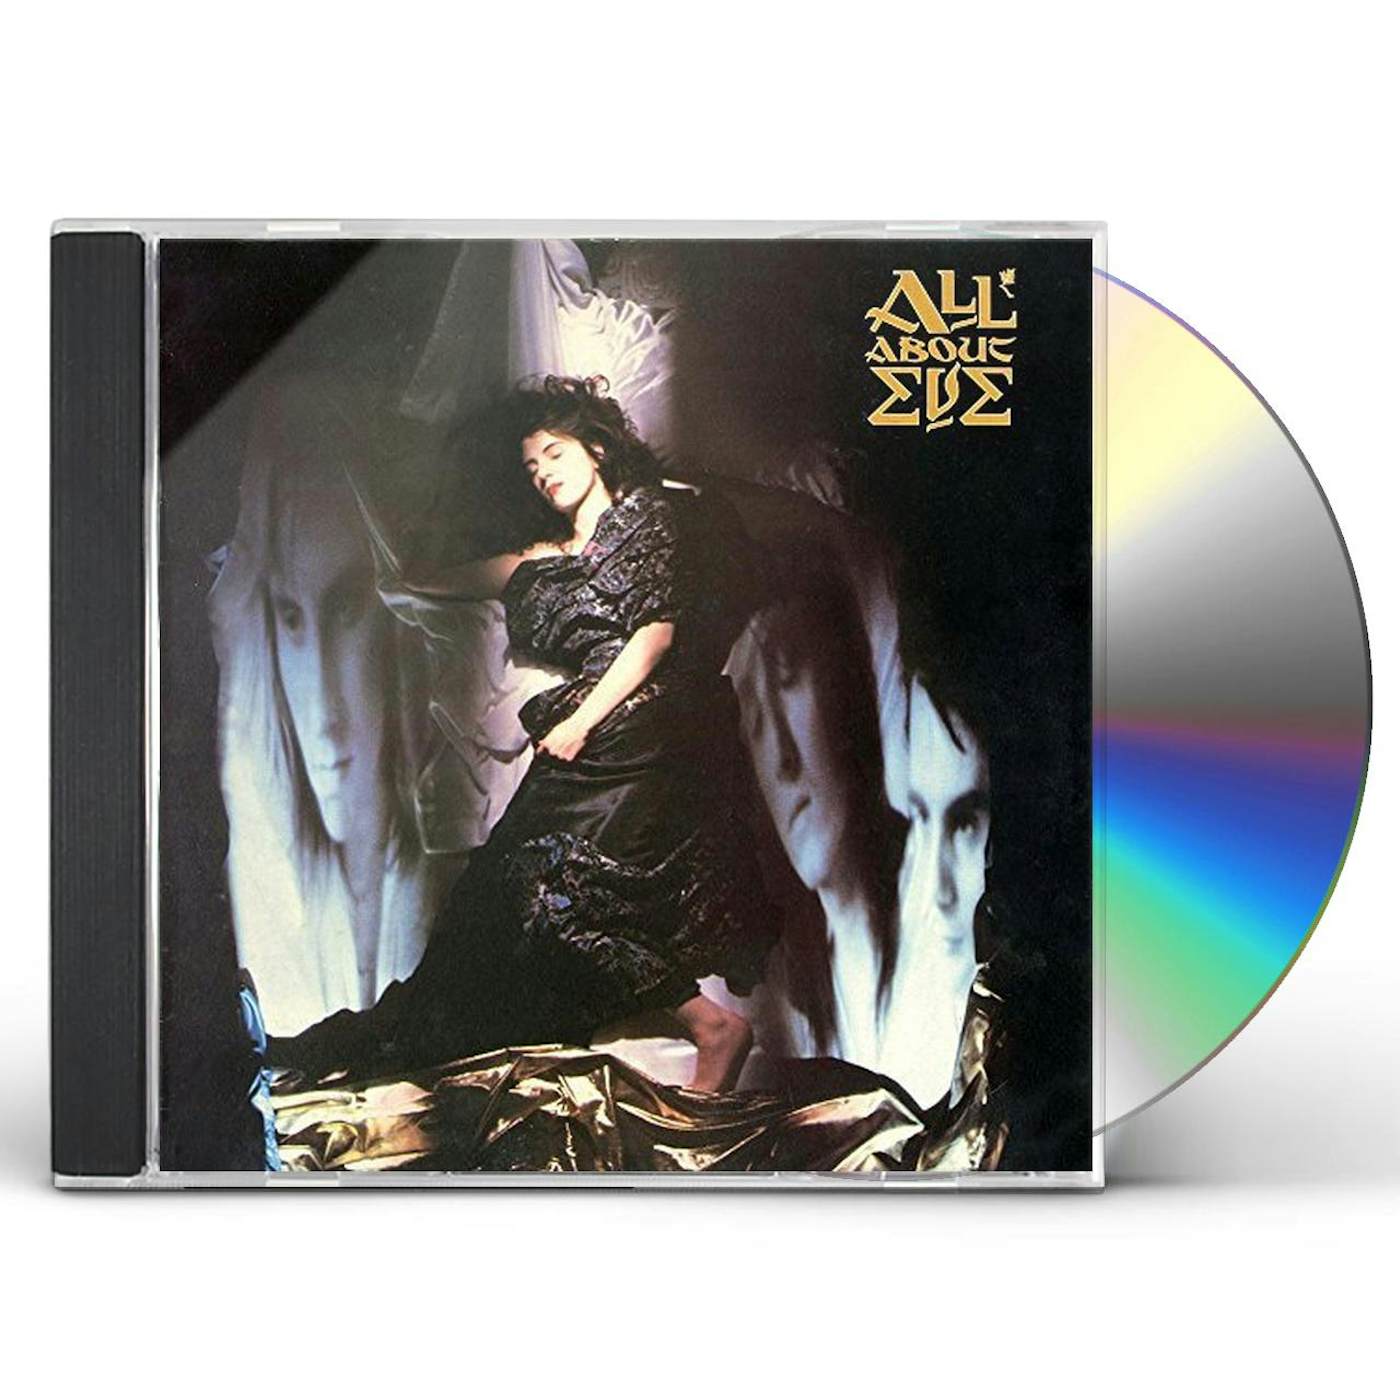 ALL ABOUT EVE CD